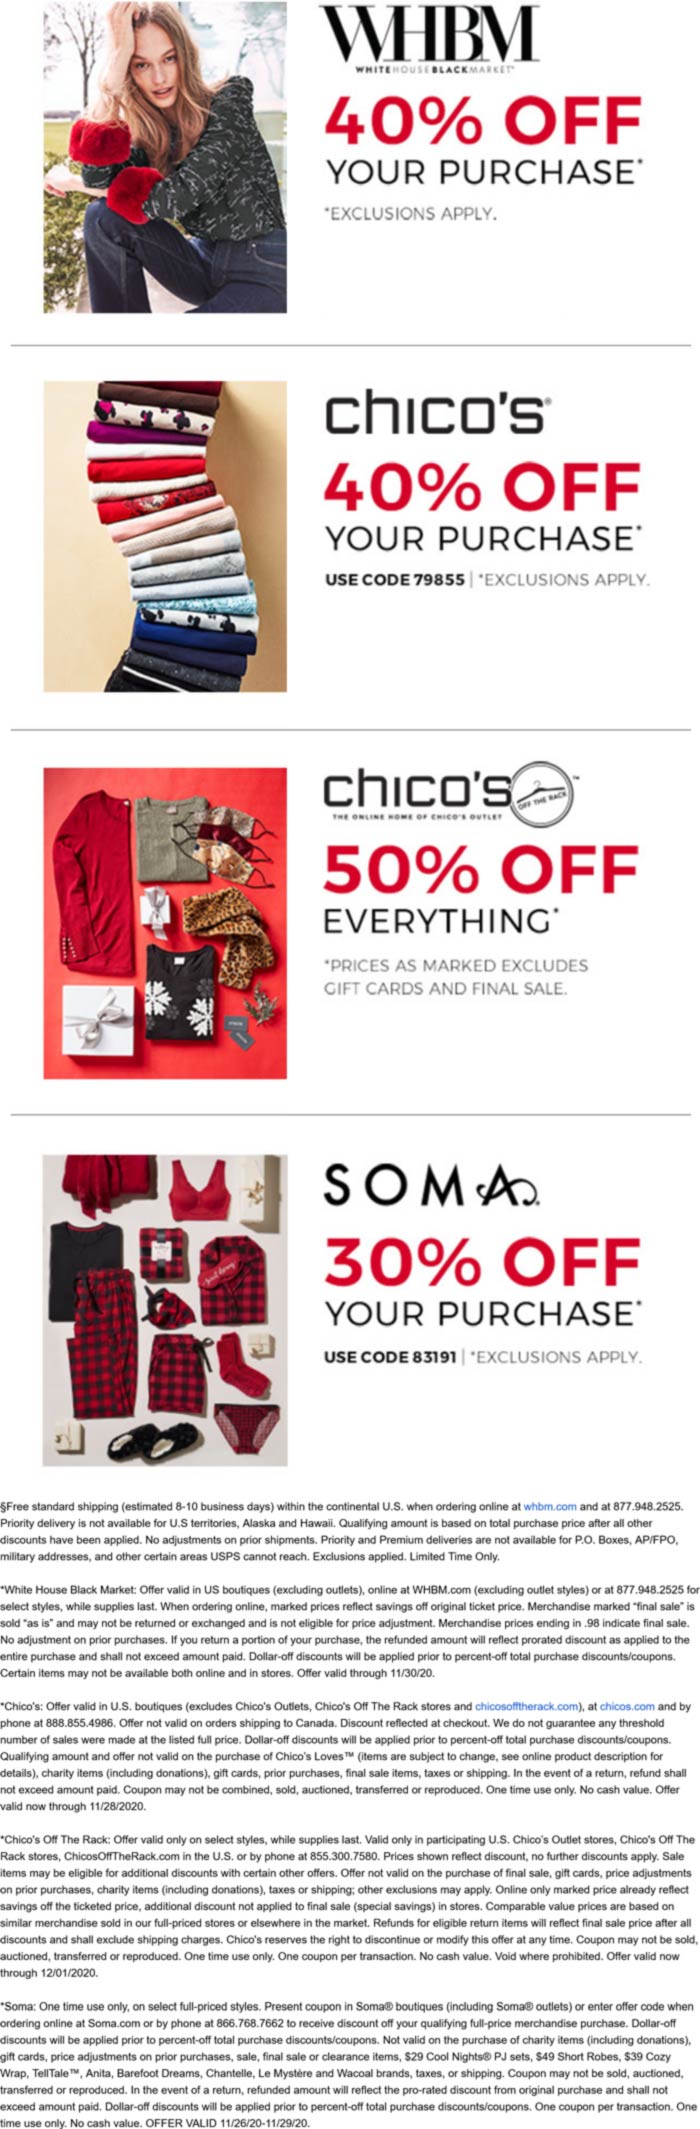 Chicos stores Coupon  30% off Soma via promo 83191, 40% off at WHBM & Chicos via 79855, 50% off Chicos Outlet locations & online #chicos 